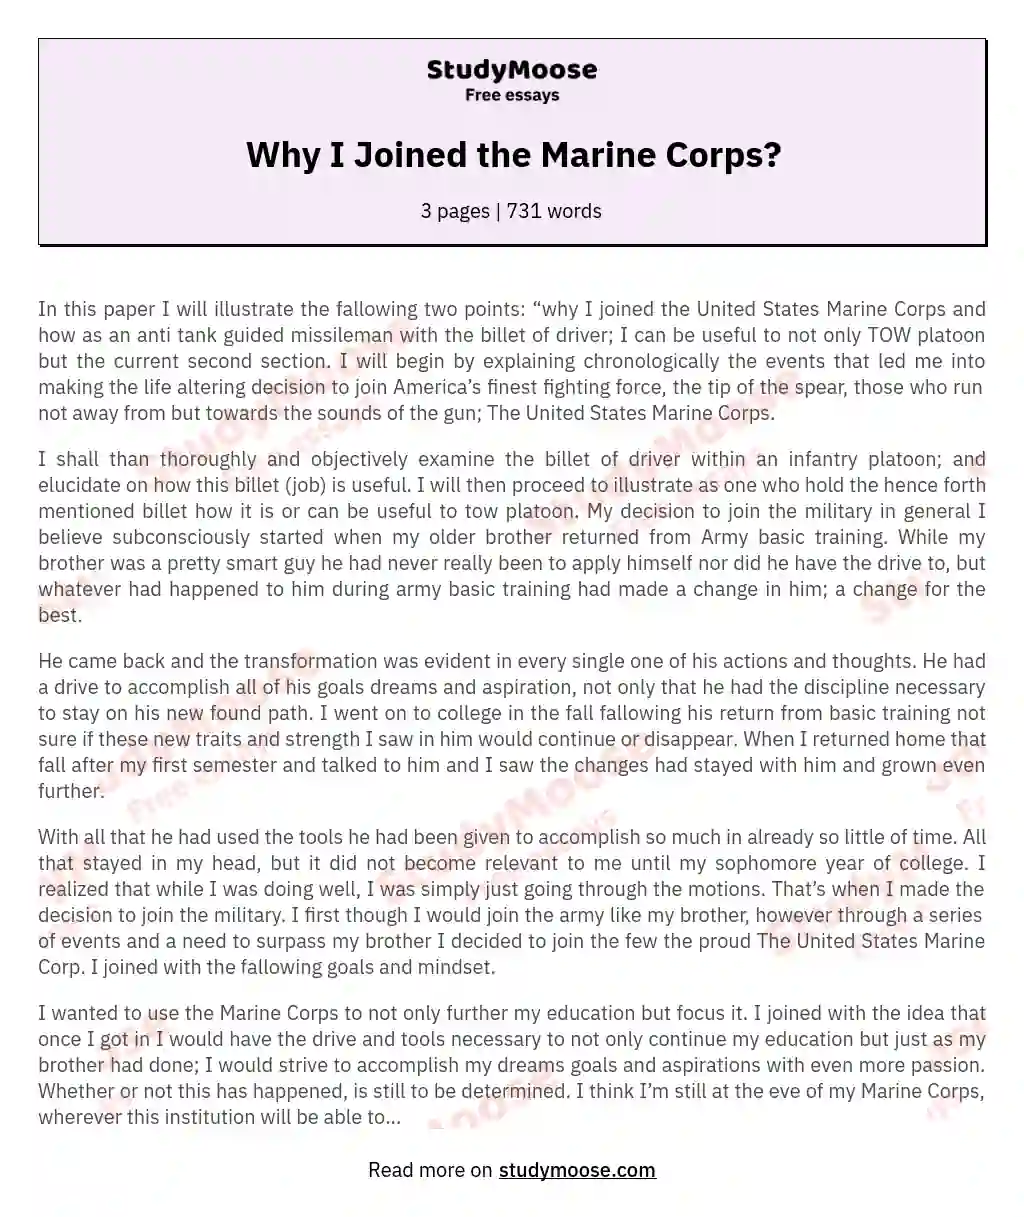 Why I Joined the Marine Corps? essay